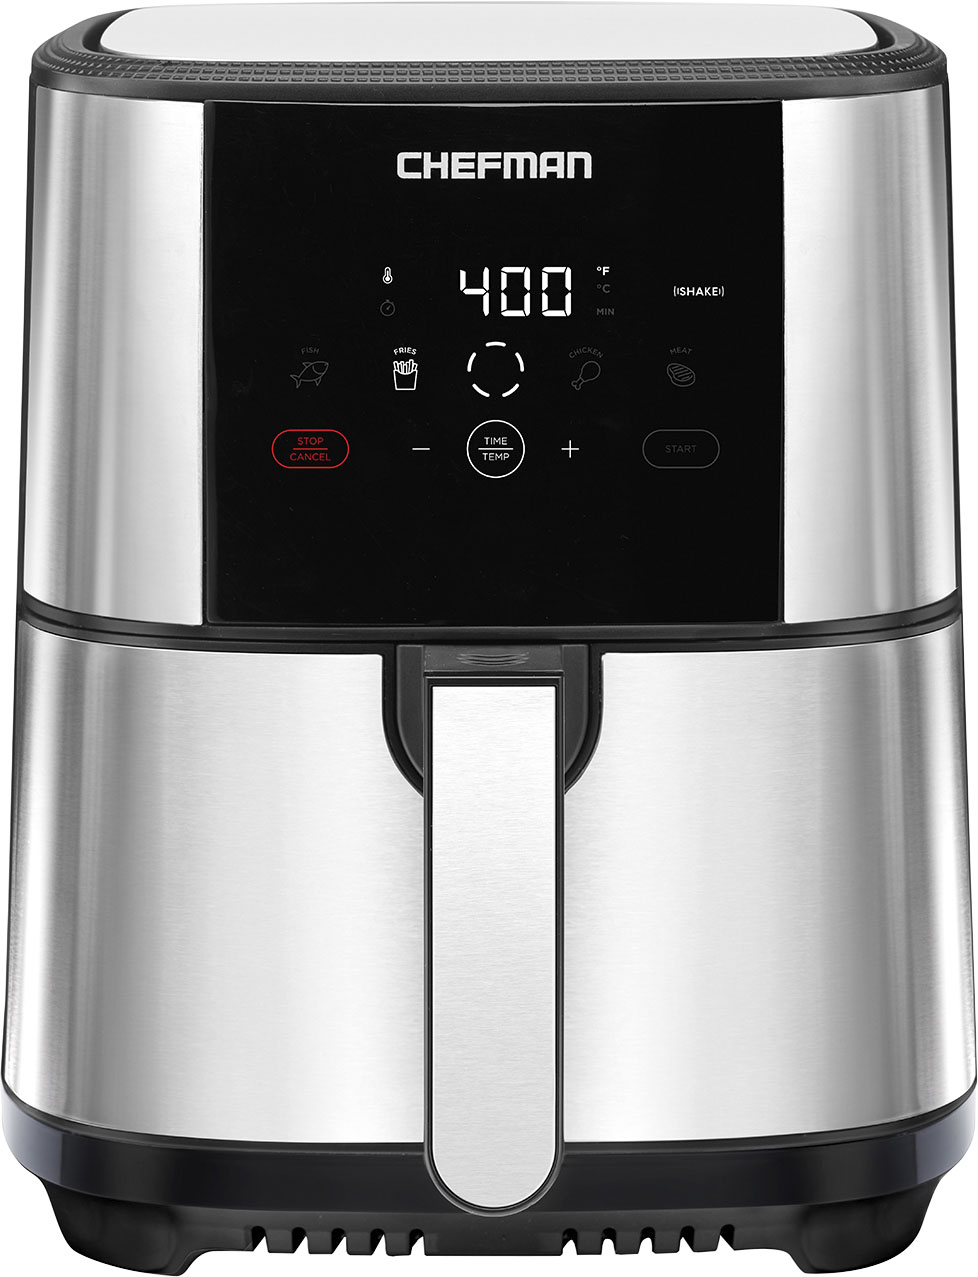 Angle View: Chefman Digital 5 Qt. Air Fryer with 4 Cooking Presets & Shake Reminder - Silver/Black